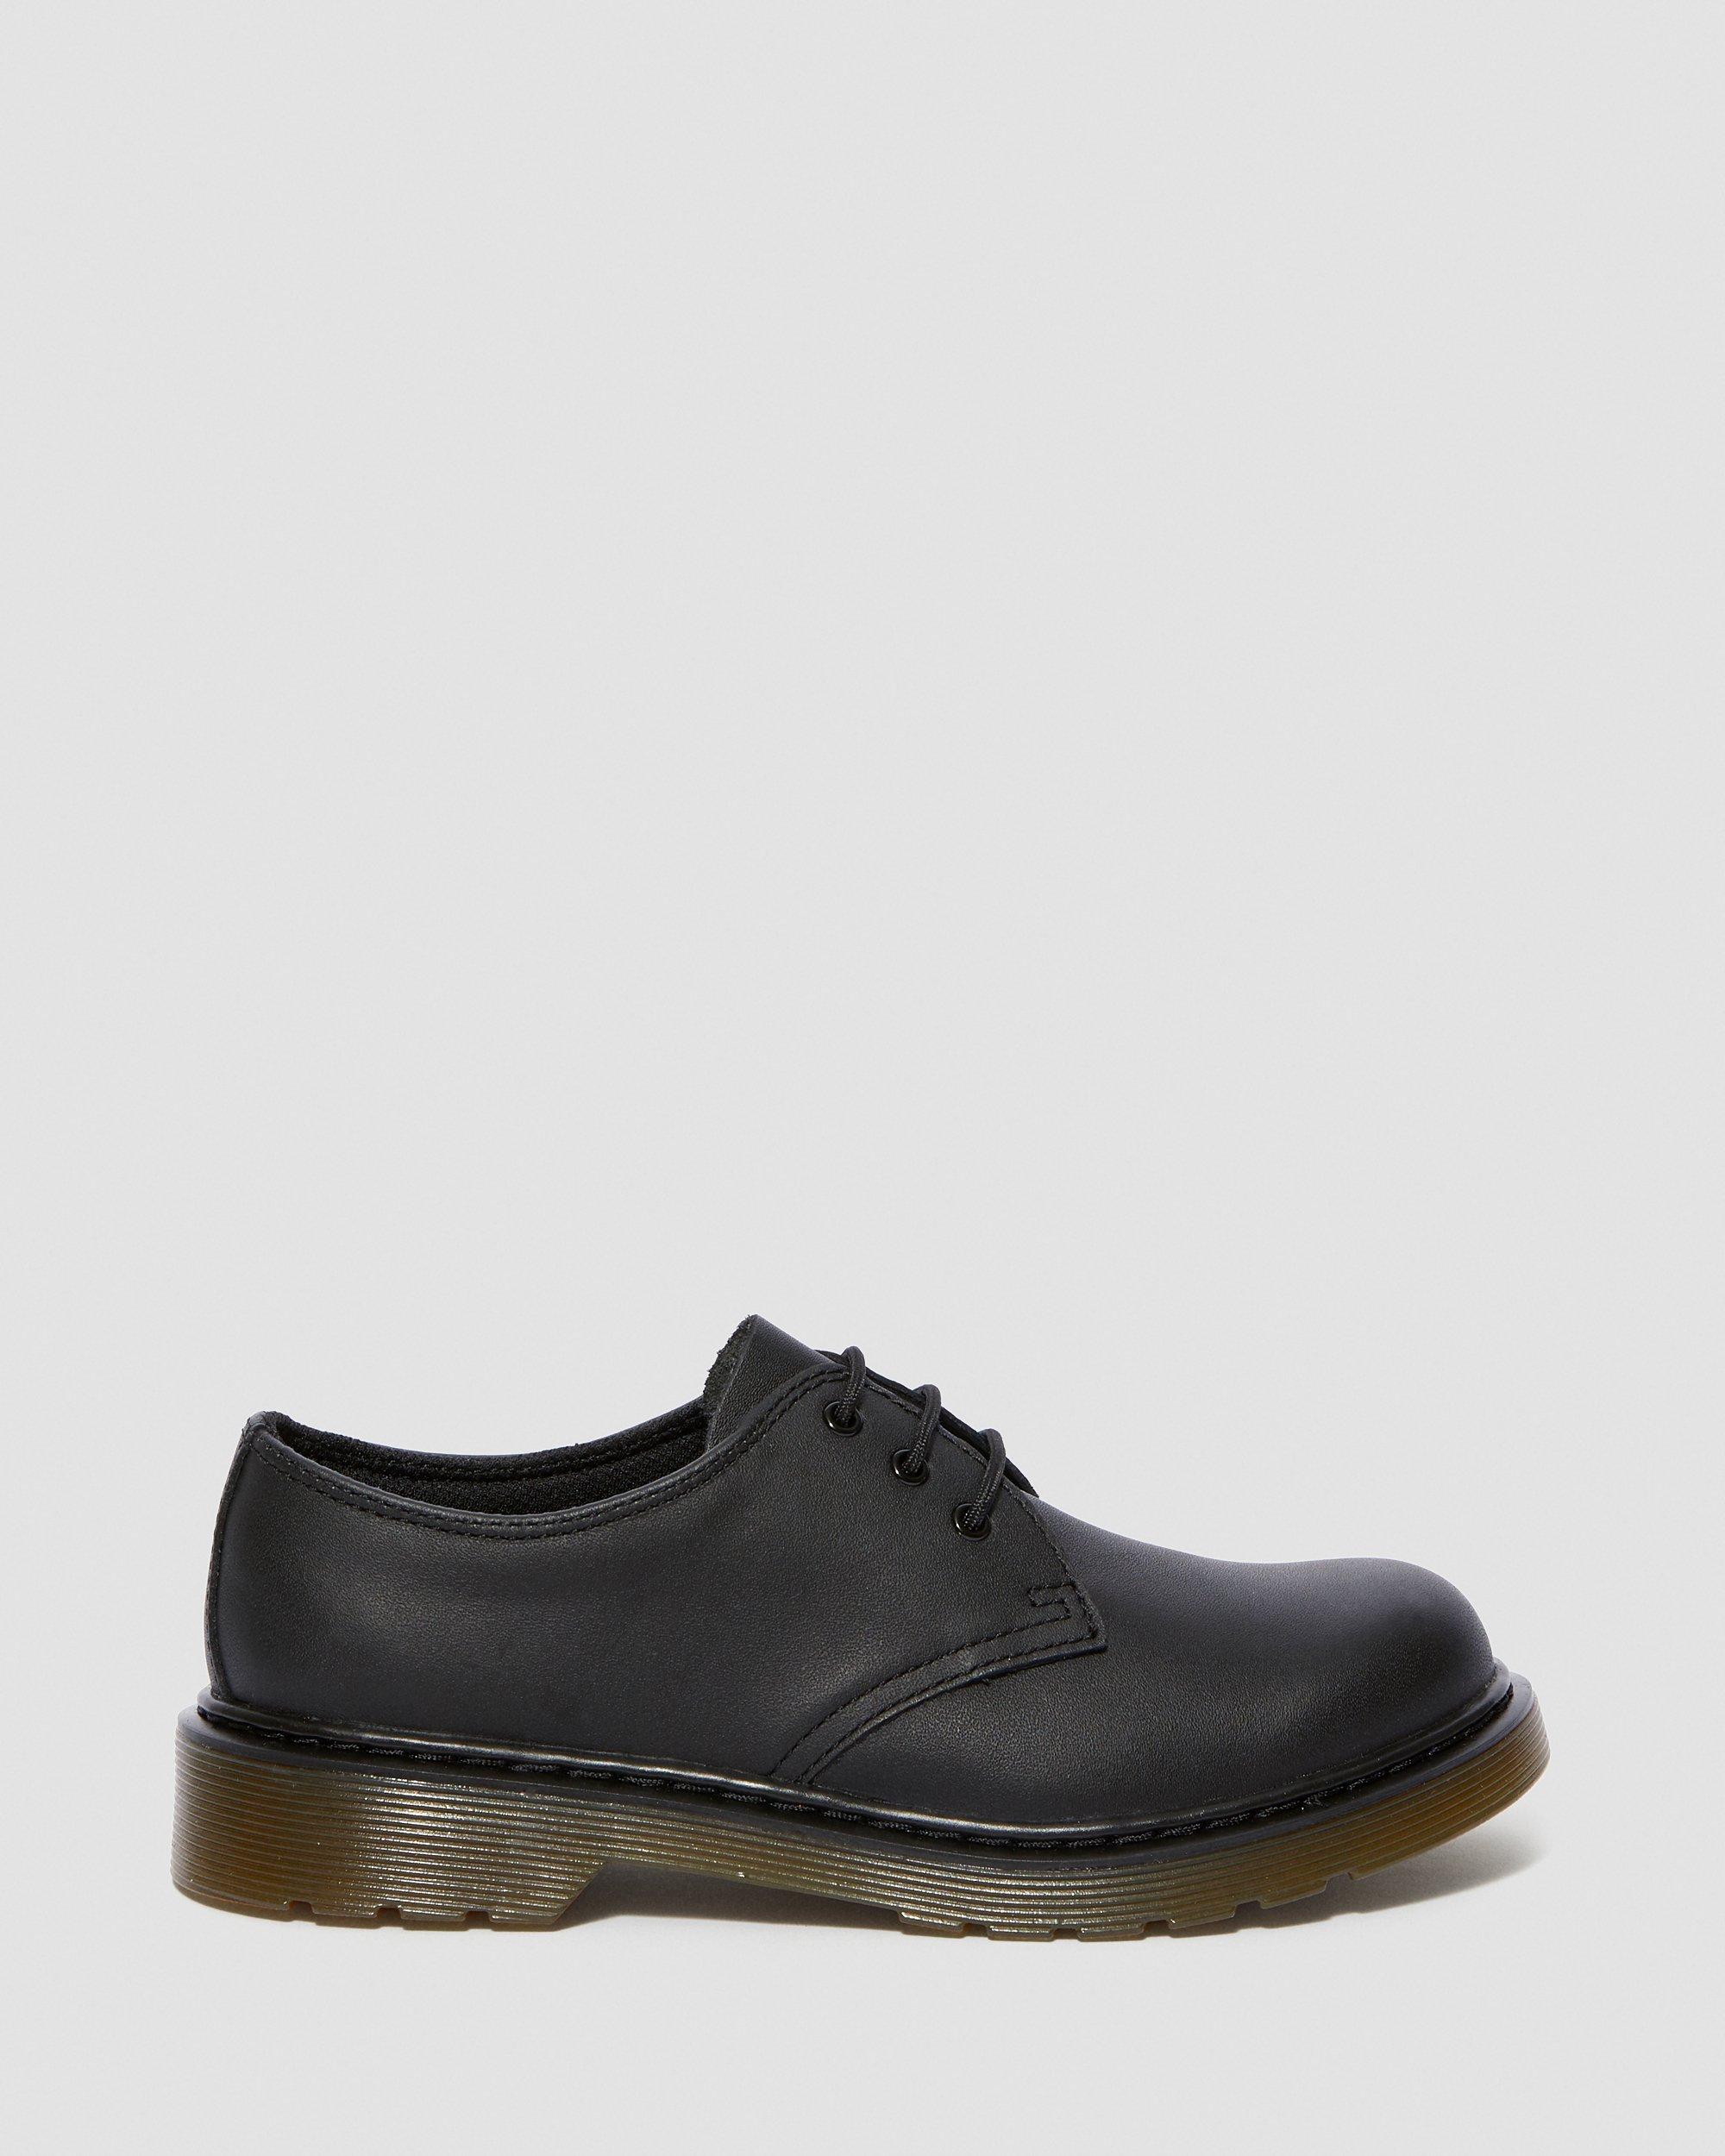 Youth 1461 Leather Oxford Shoes | Dr. Martens